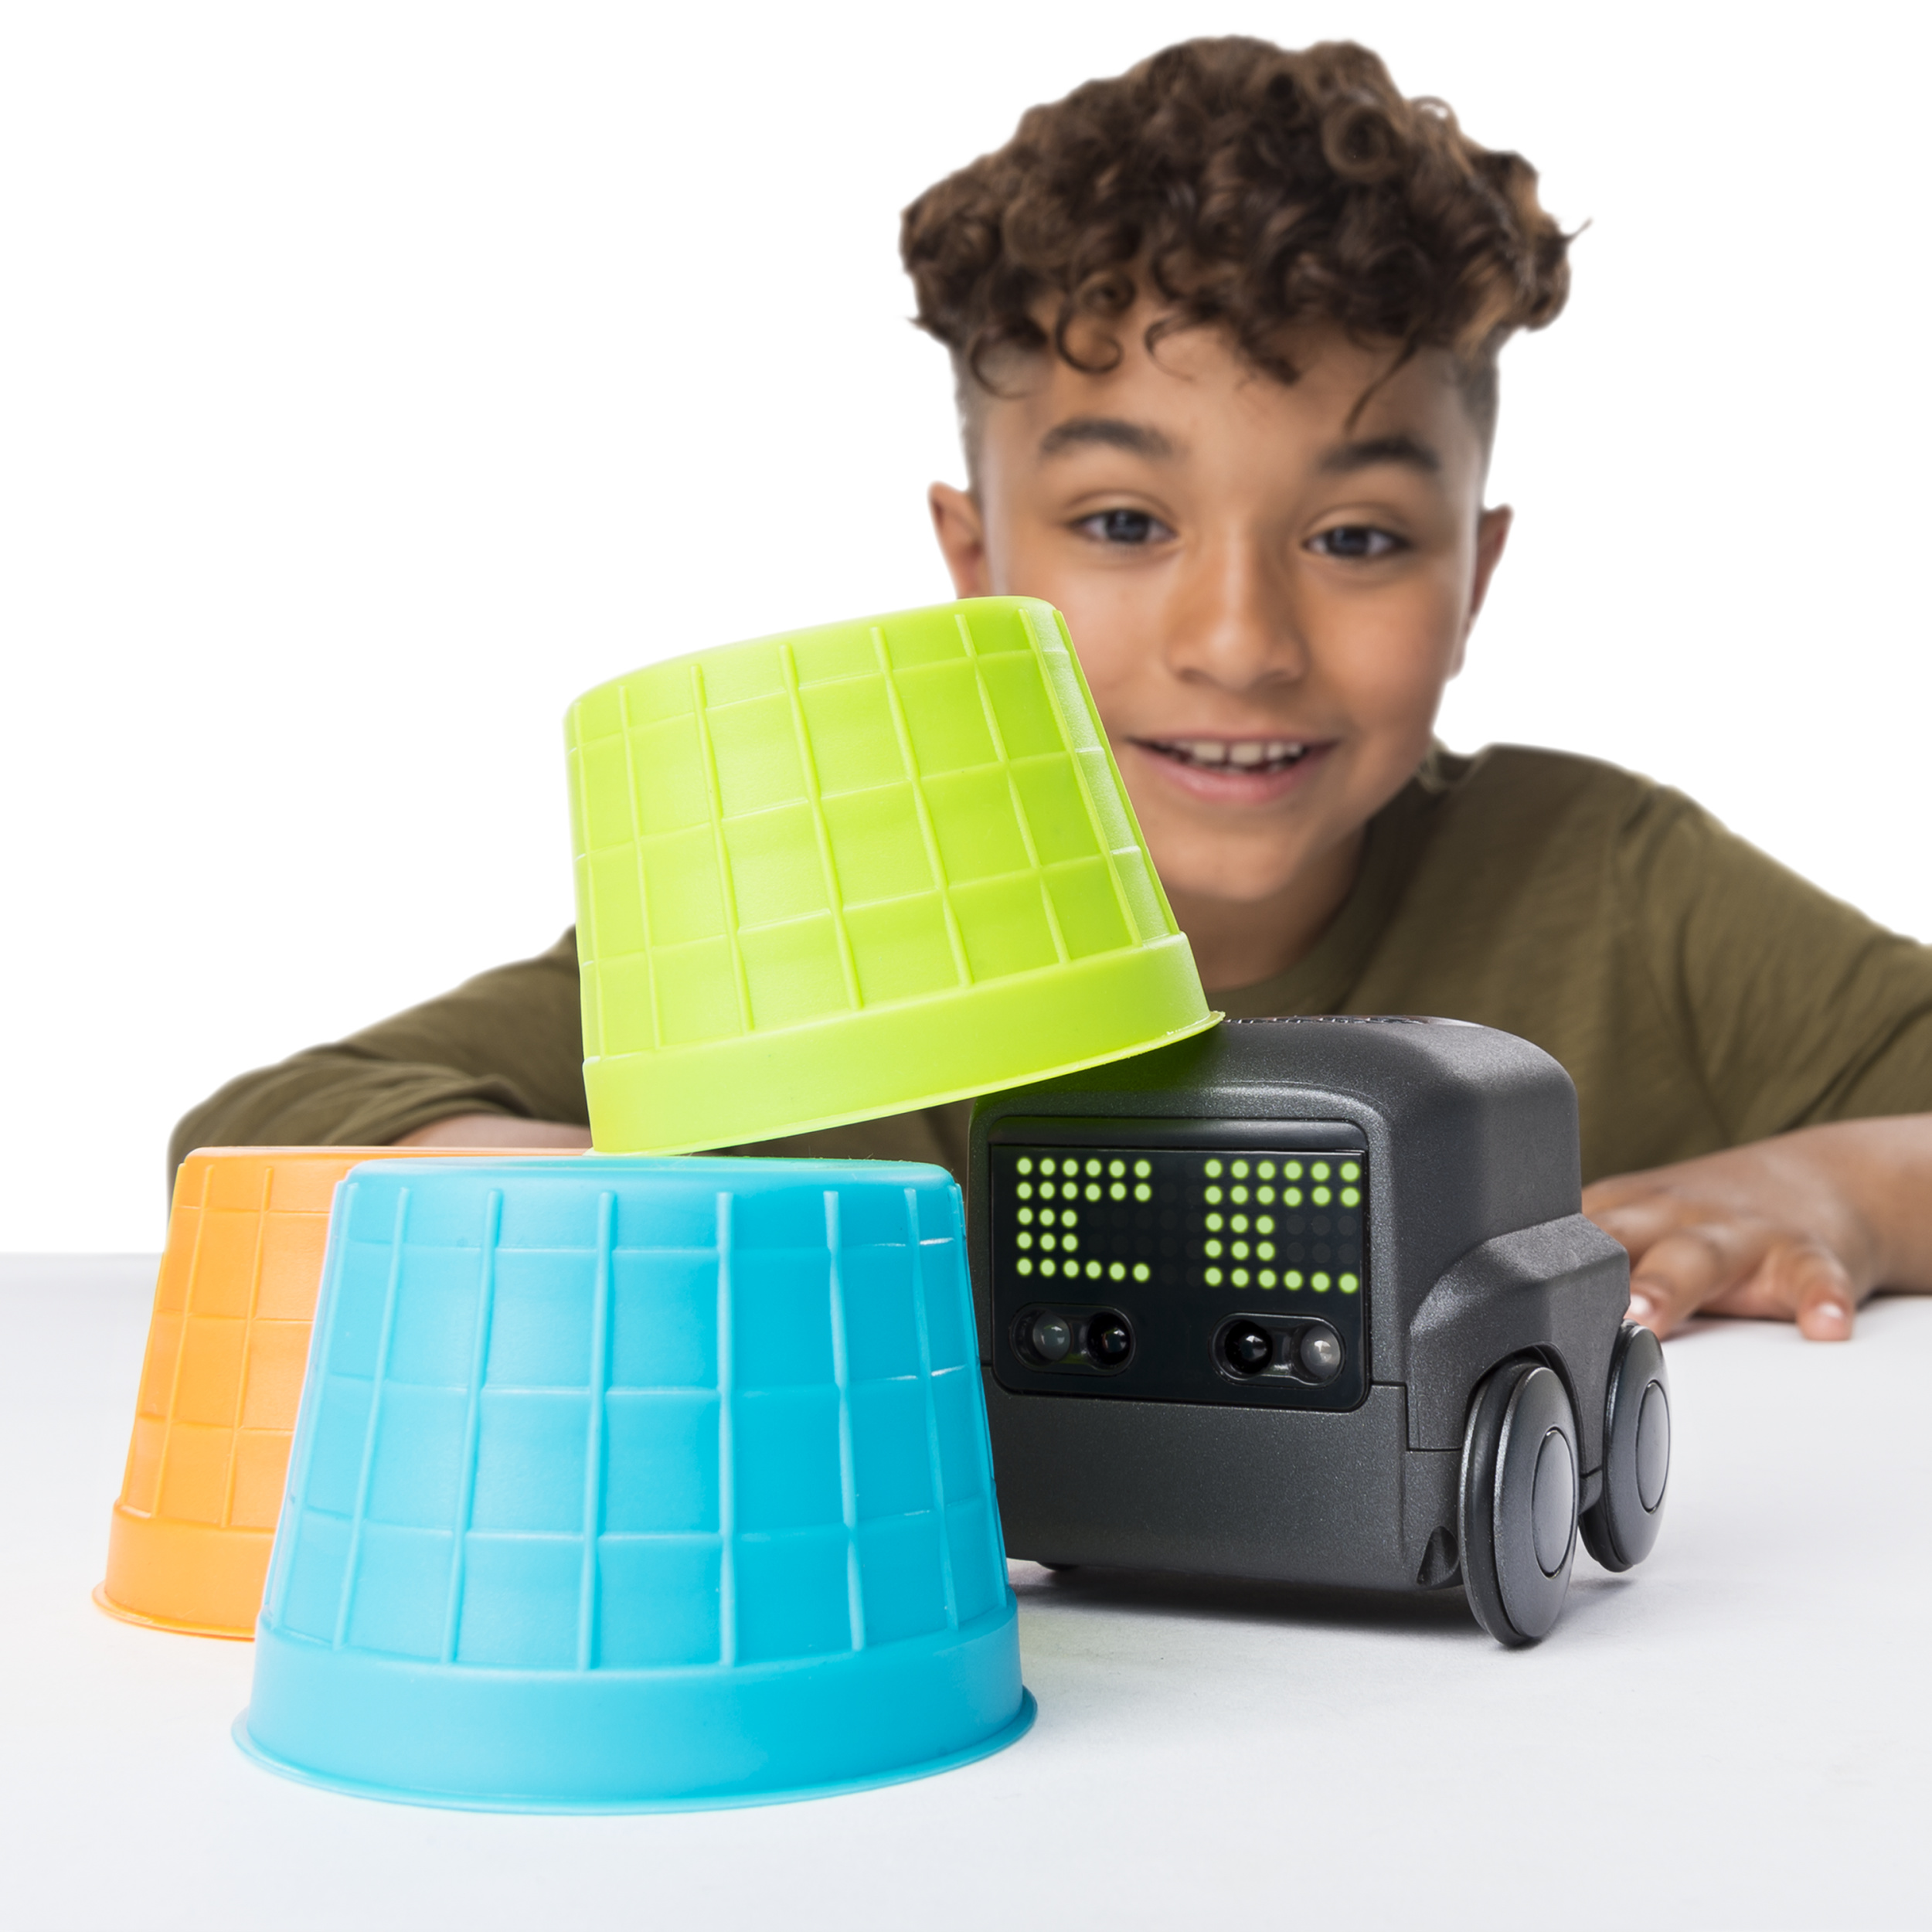 Boxer Interactive A.I. Robot Toy (Black) with Personality and Emotions, for Ages 6 and Up - image 6 of 8